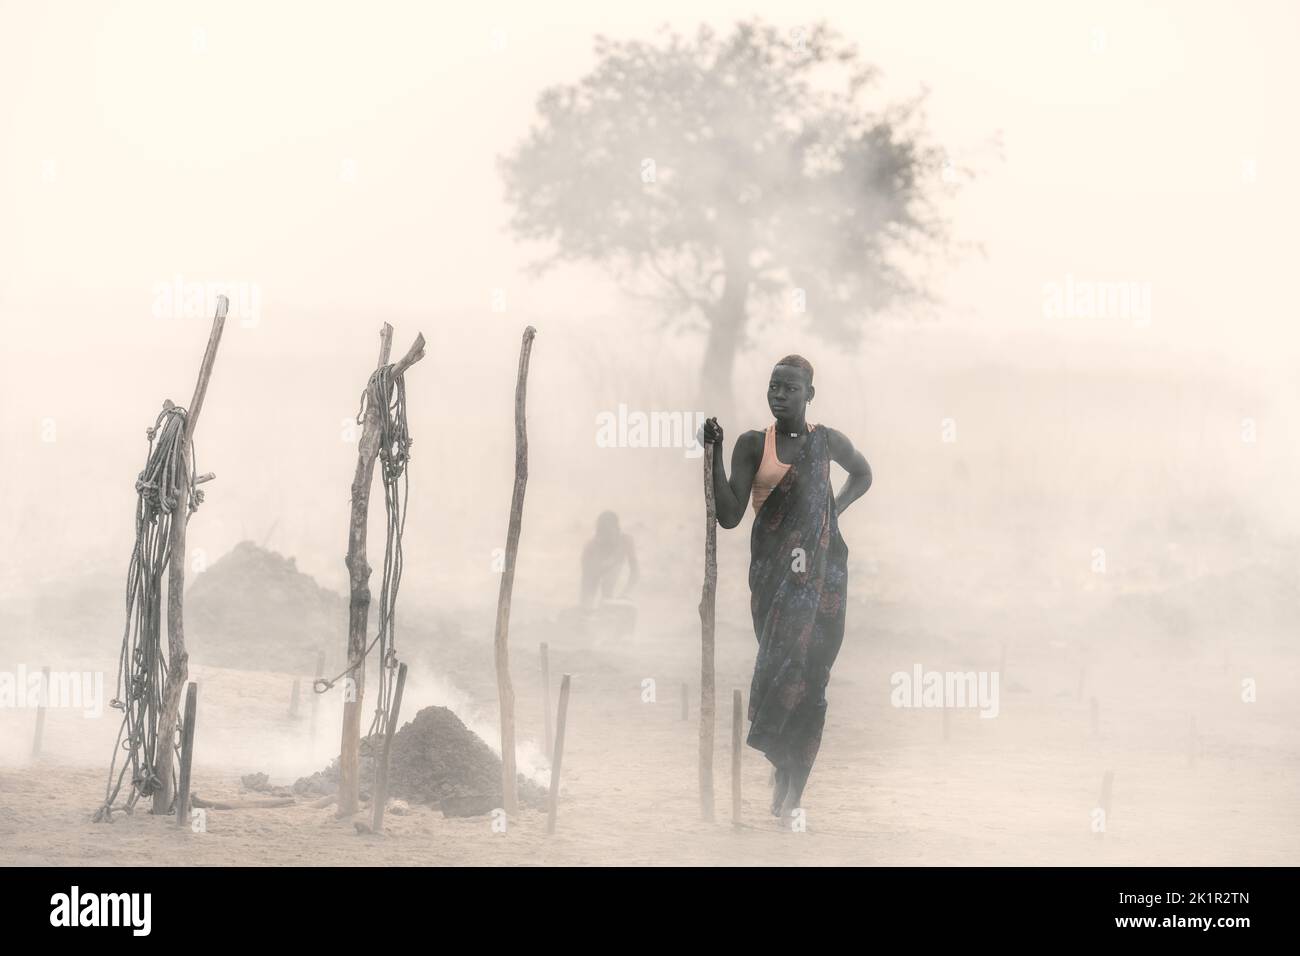 A woman waiting to tether the cattle. South Sudan: THESE STUNNING images show the incredible bond between the Mundari people and their cattle in South Stock Photo